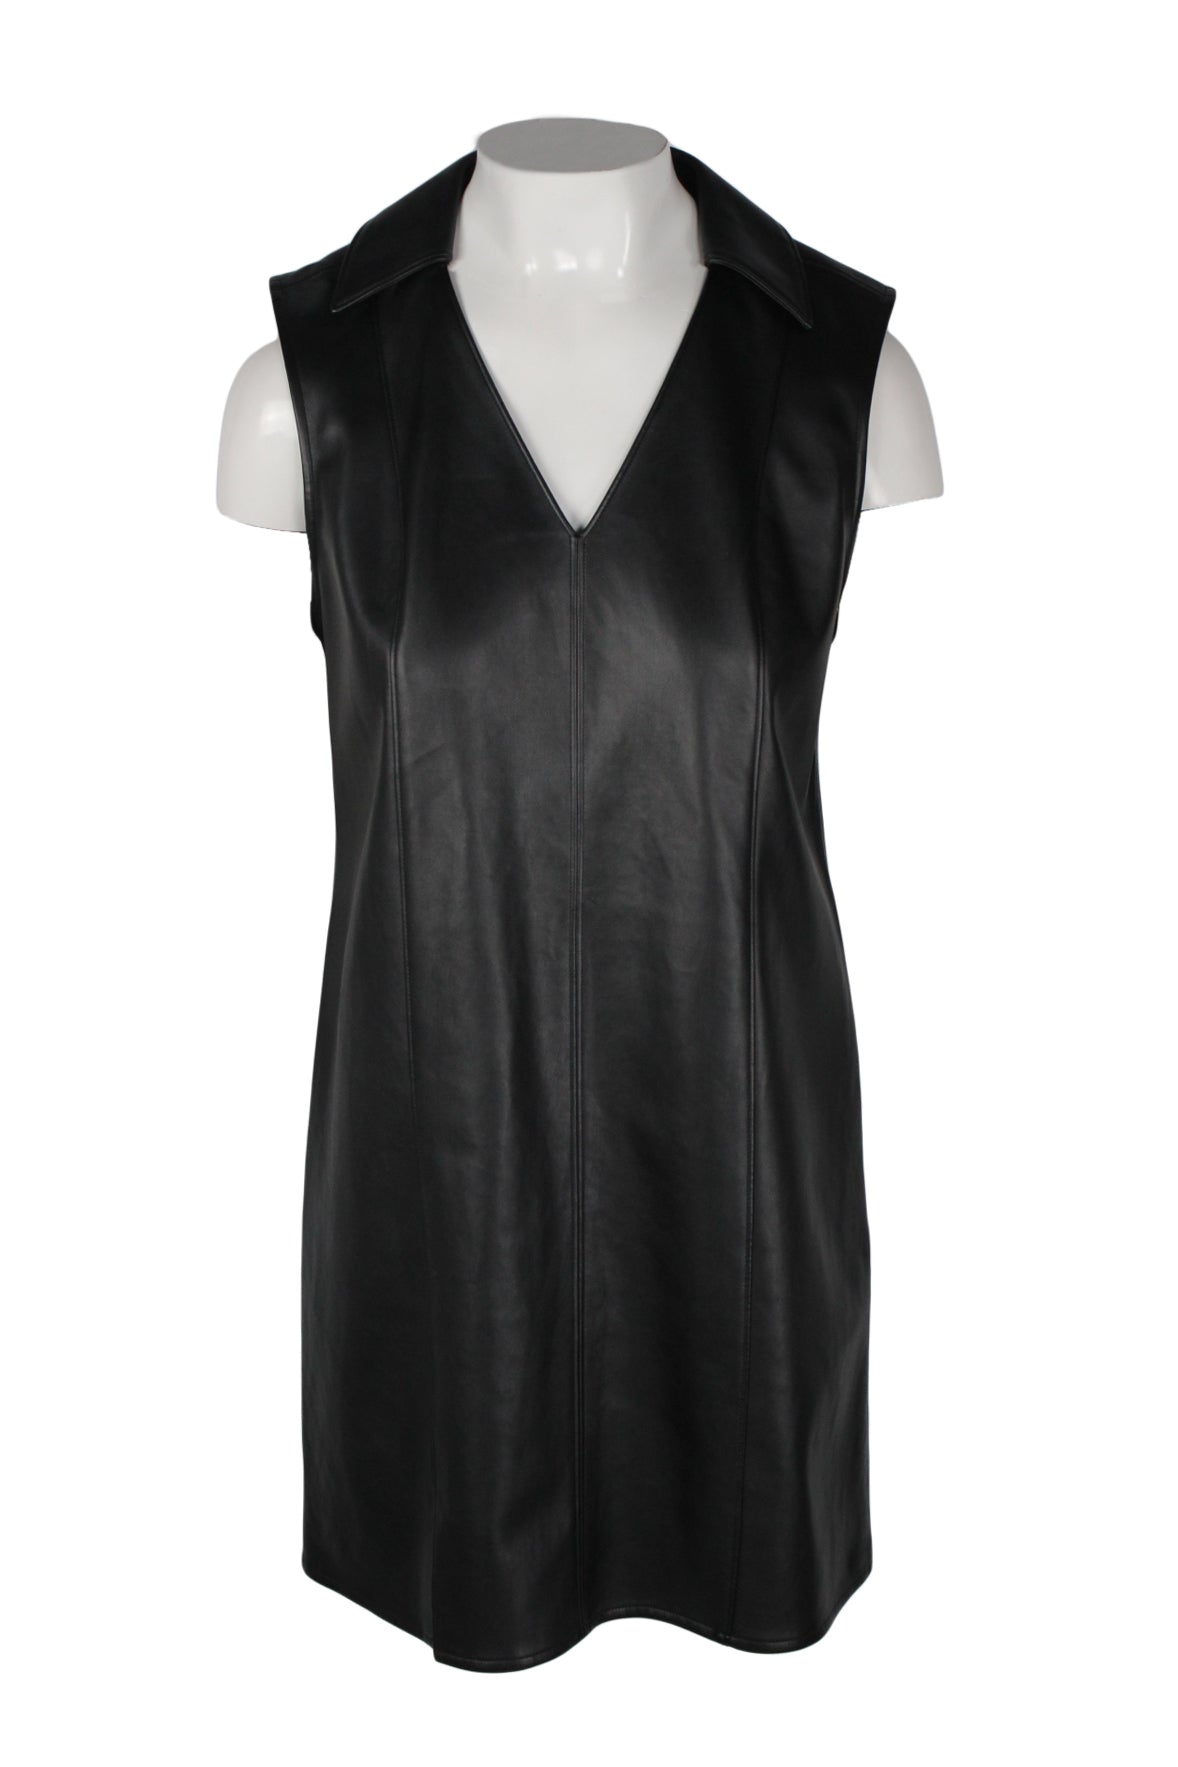 description: t by alexander wang faux-leather black dress. features collar, v neckline, and loose fit. 